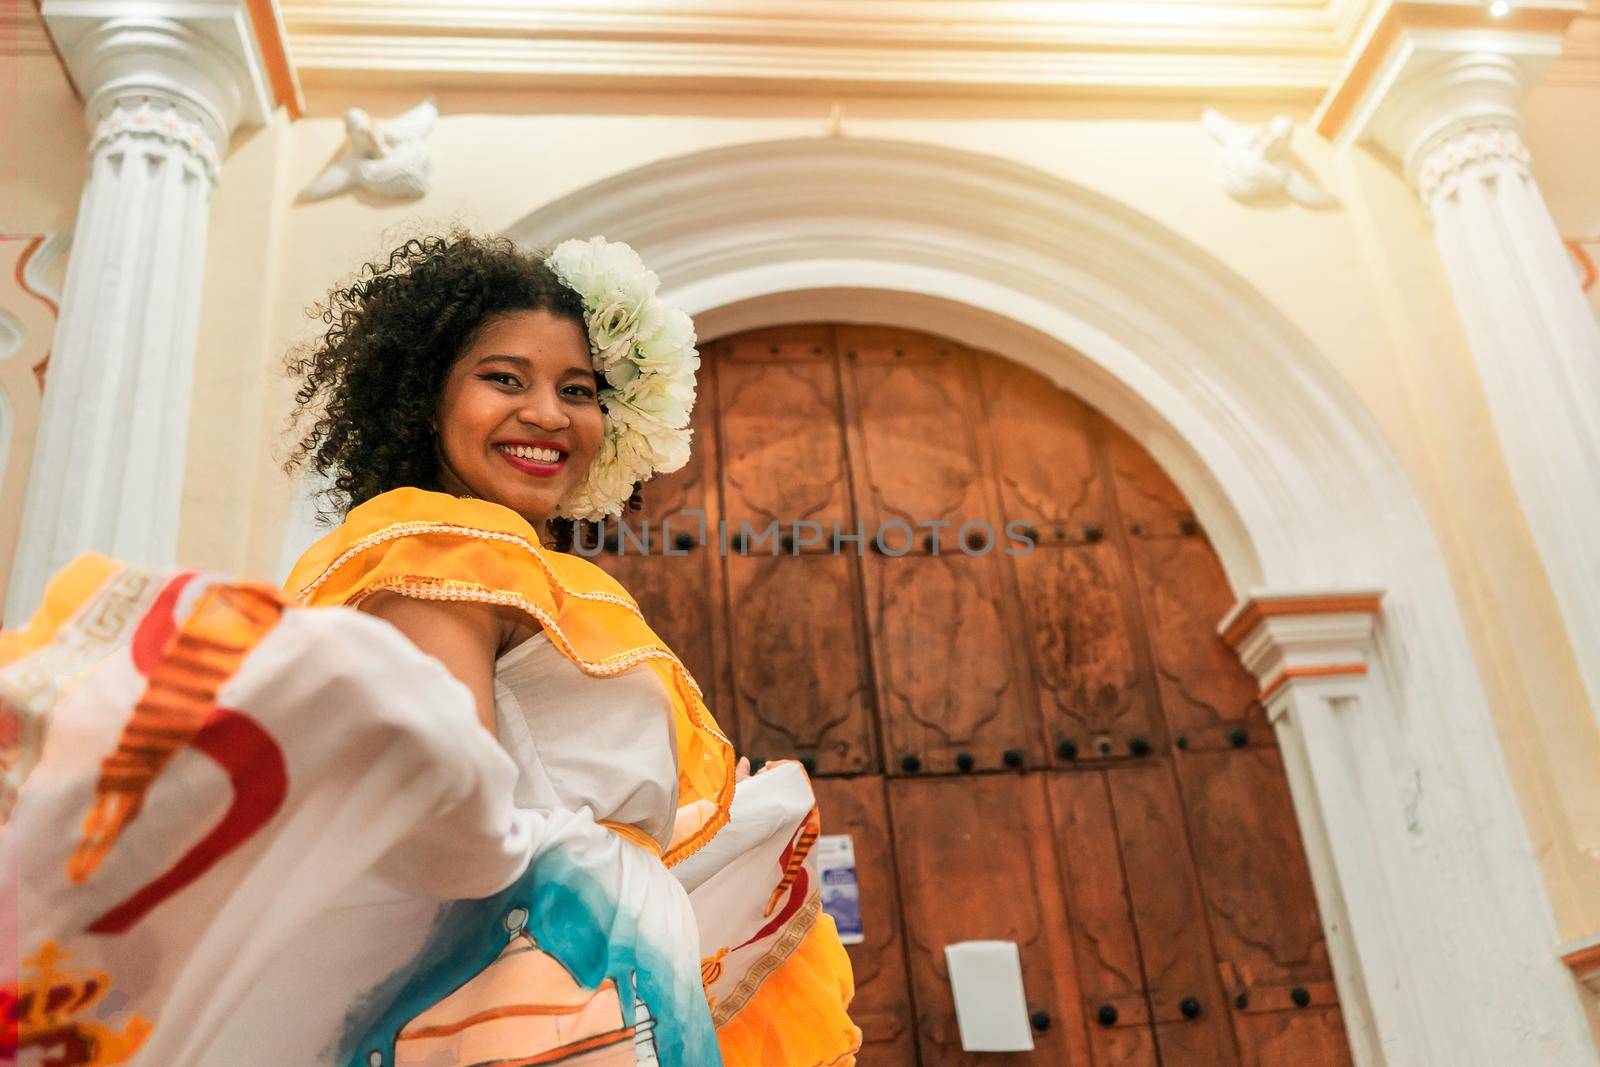 Young mestizo woman with curly black hair outside a church in Leon Nicaragua, wearing a traditional yellow dress looking at the camera and smiling. Concept of dance culture and tradition in Latin America.